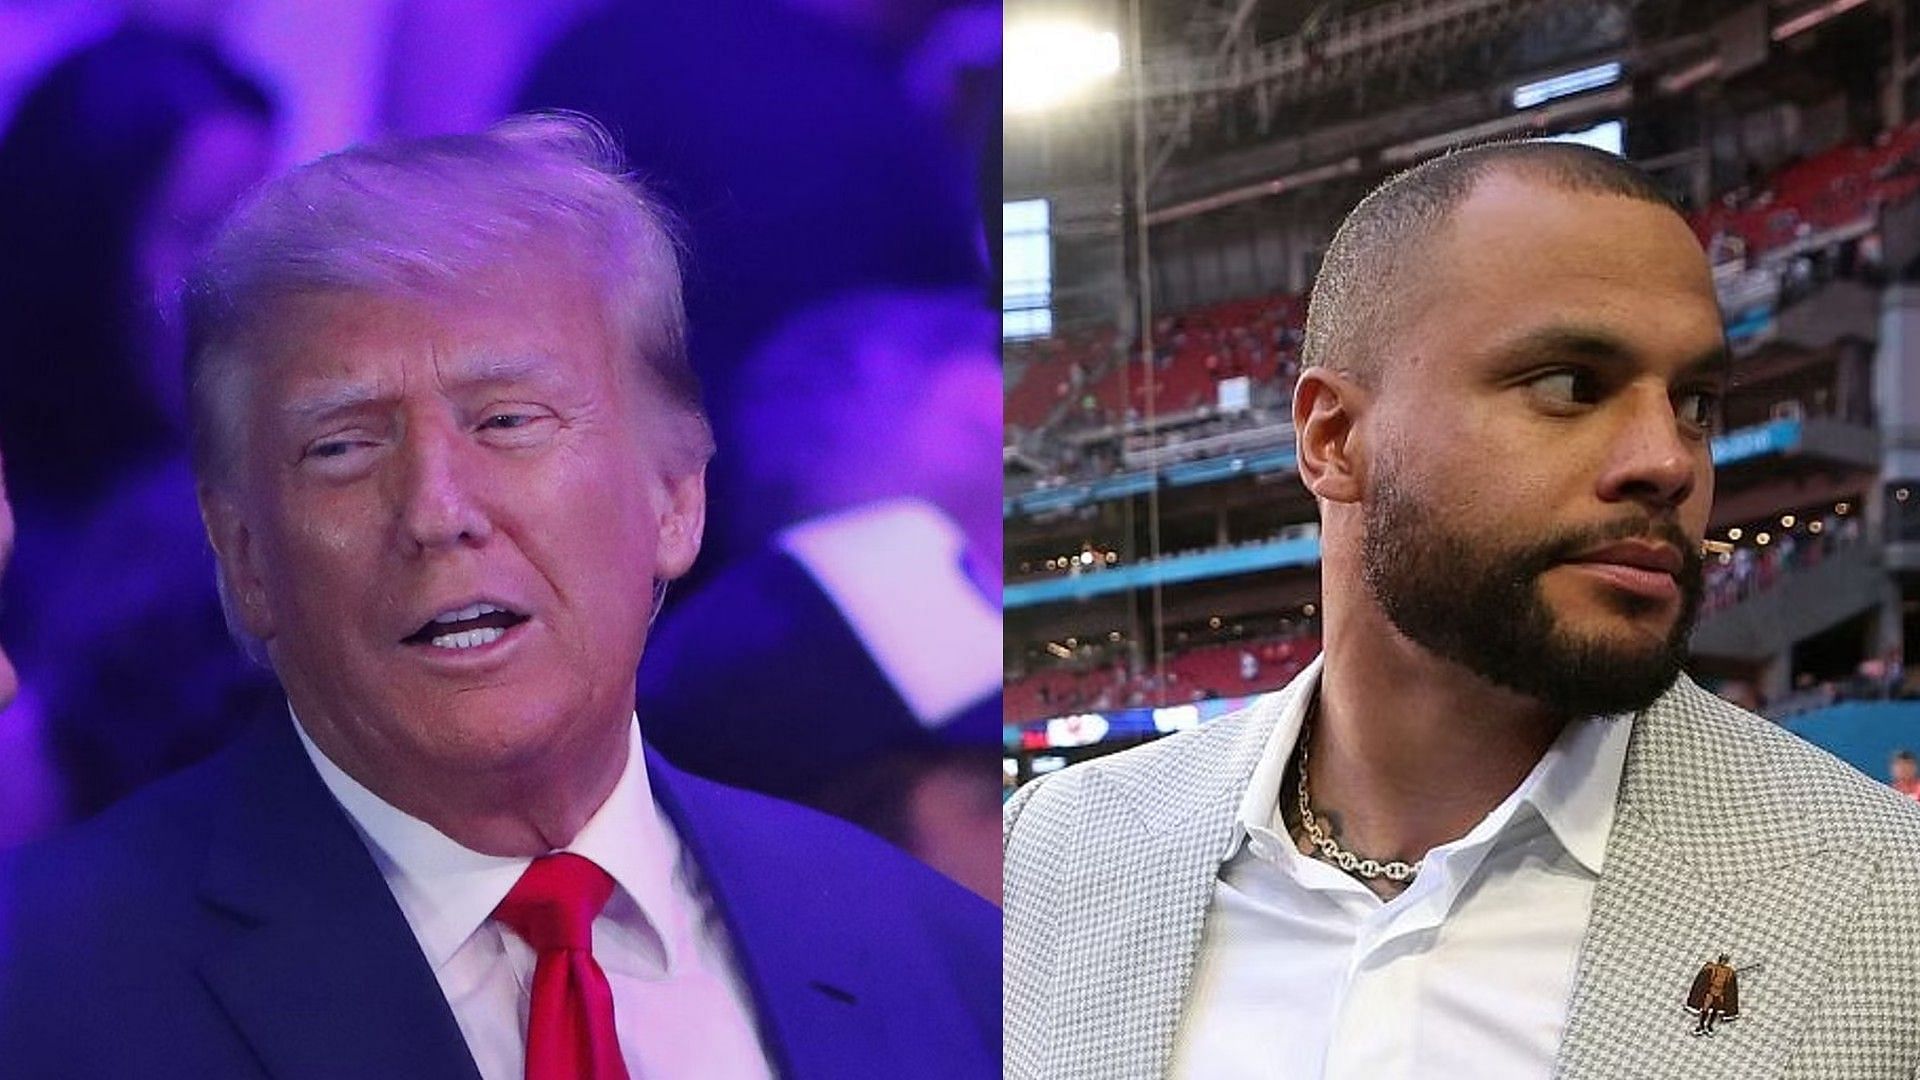 Dak Prescott gets kicked out of top 10 by author endorsed by Donald Trump